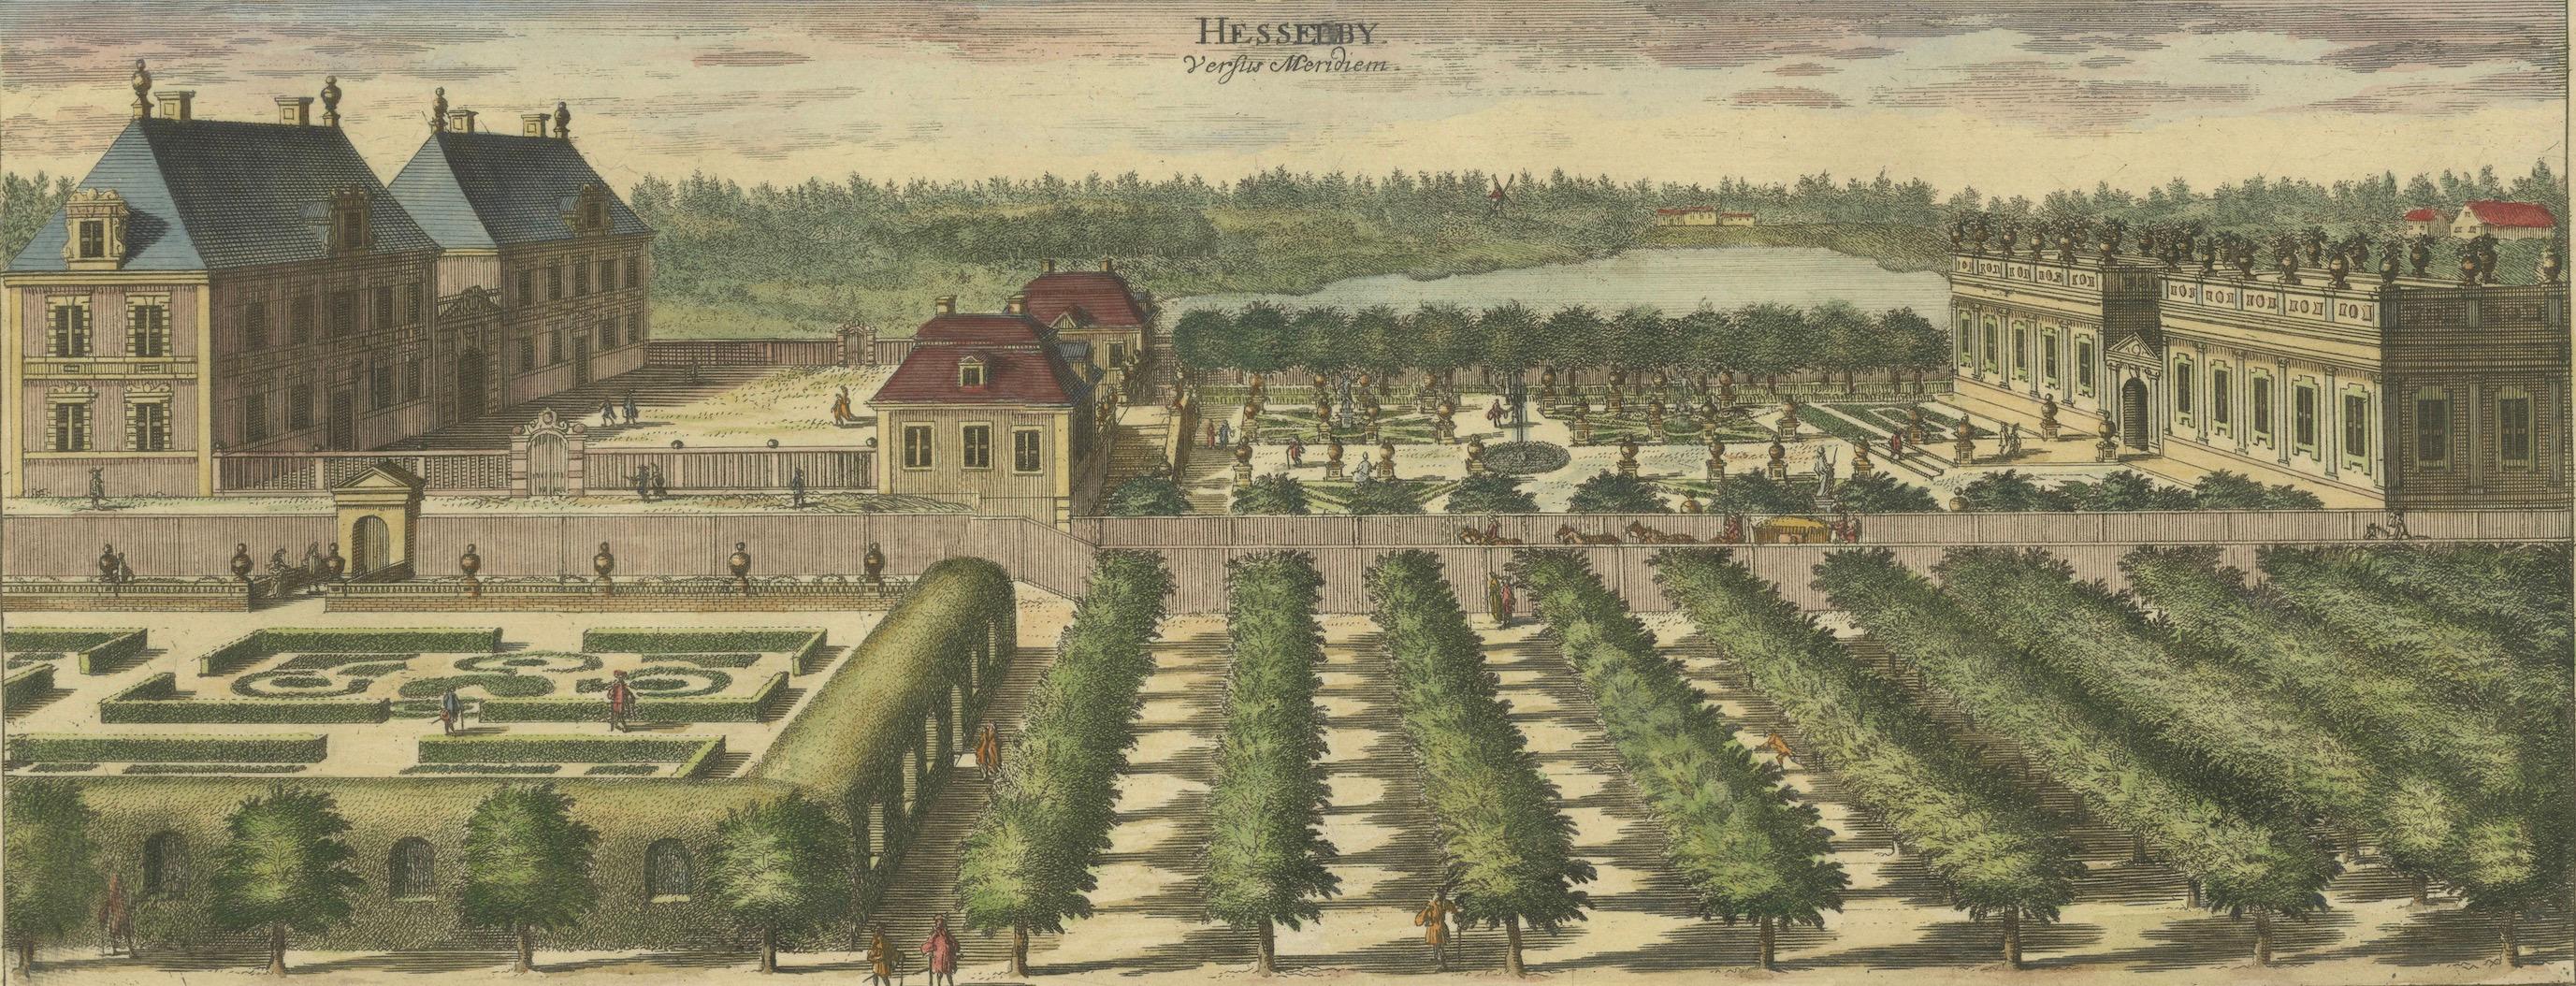 Engraved Hand-colored Views of Hesselby Castle in Stockholm, Sweden, 1707 For Sale 4